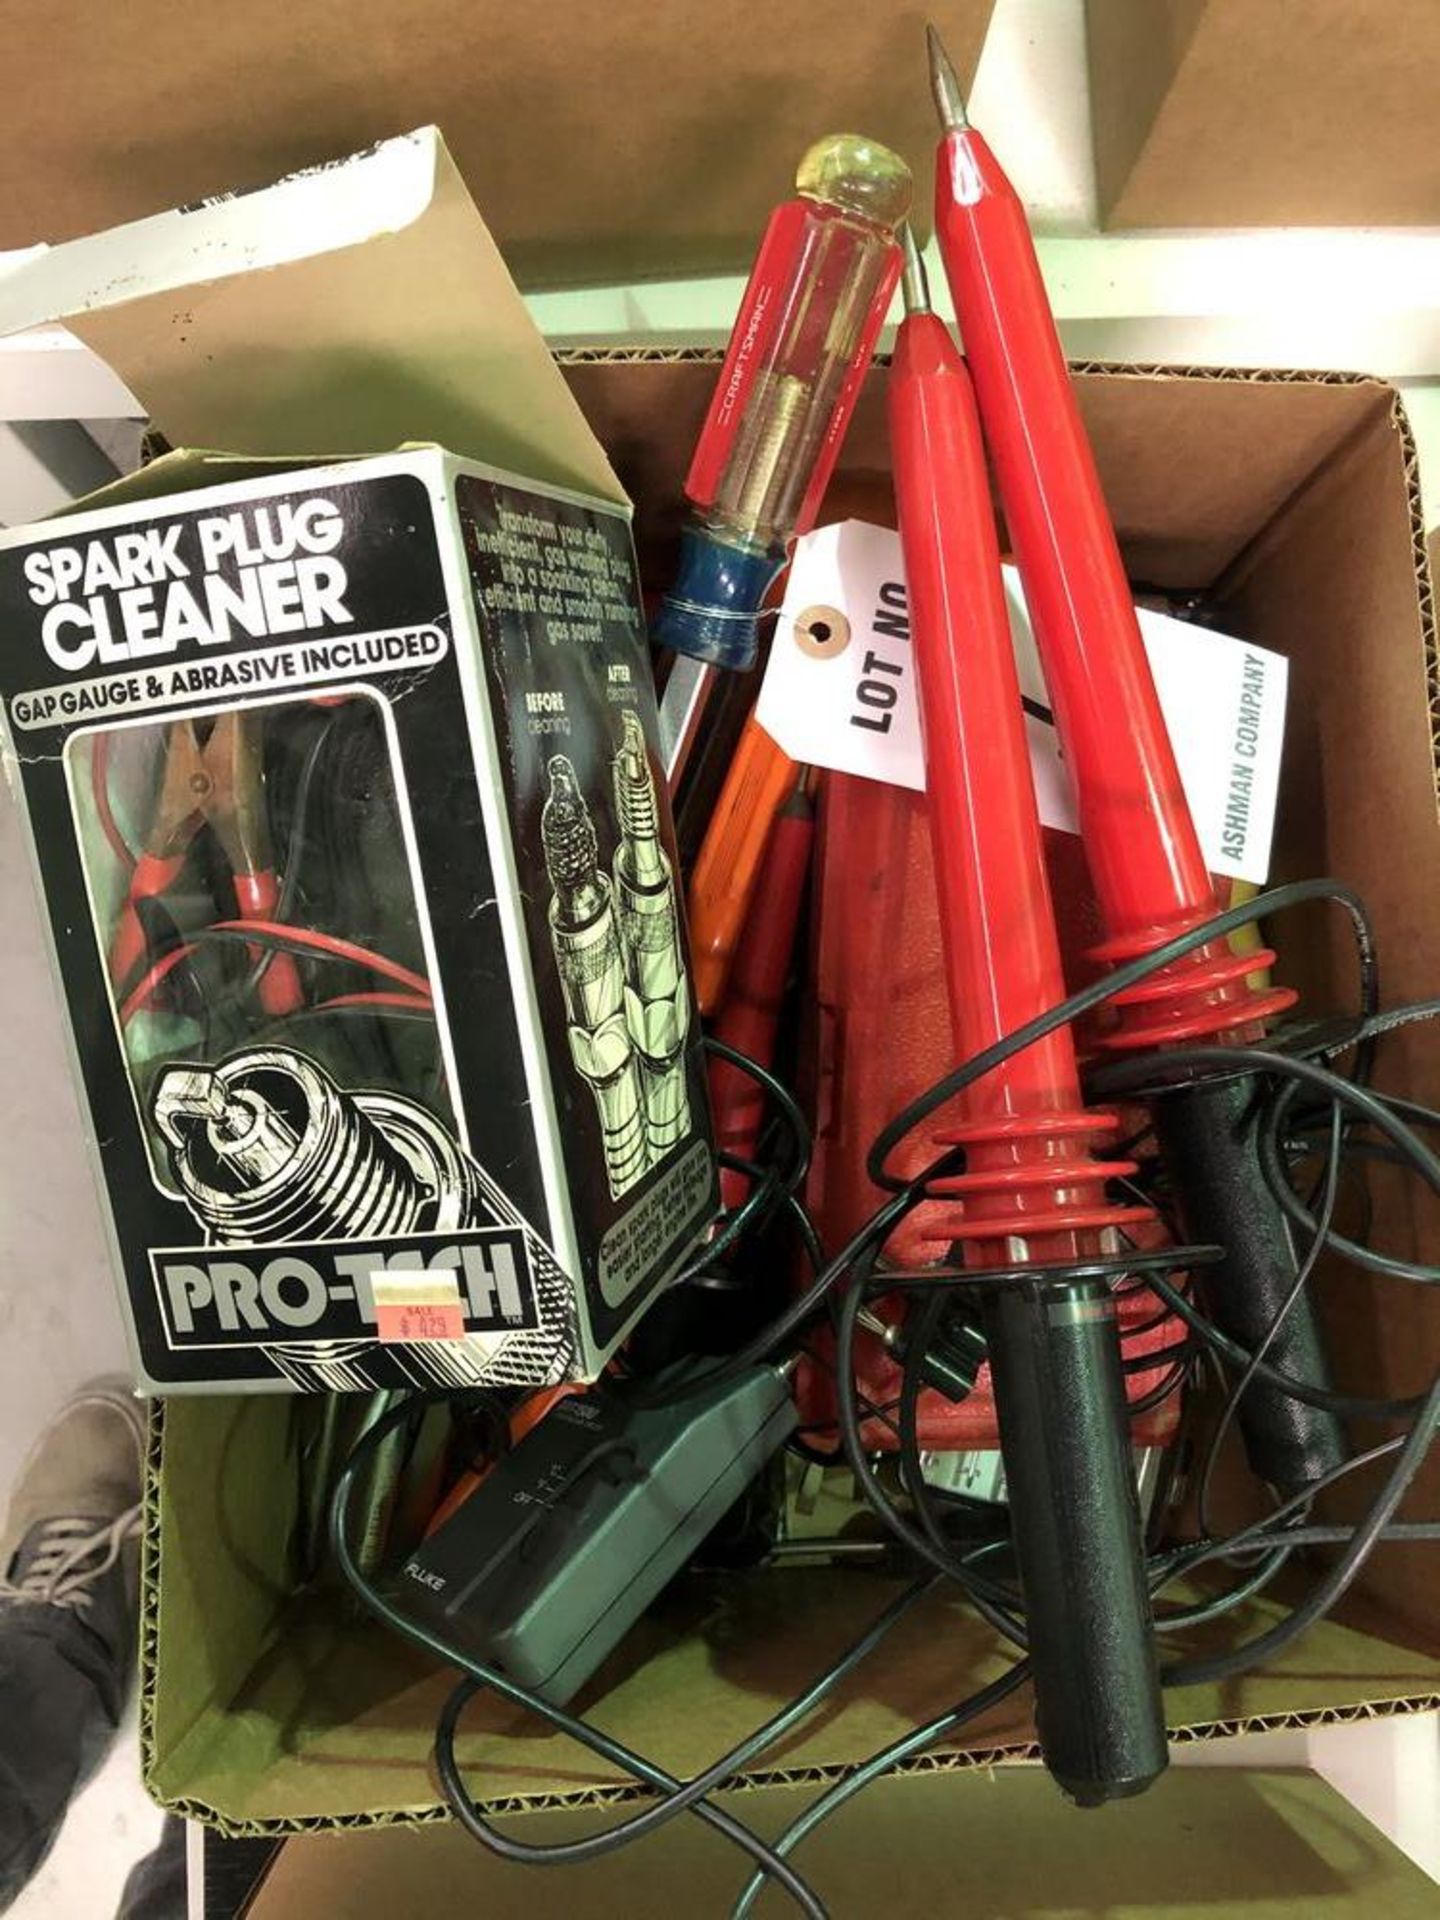 (LOT) MISC SCREW DRIVERS, SPARK PLUG CLEANER, SOLDERING IRONS